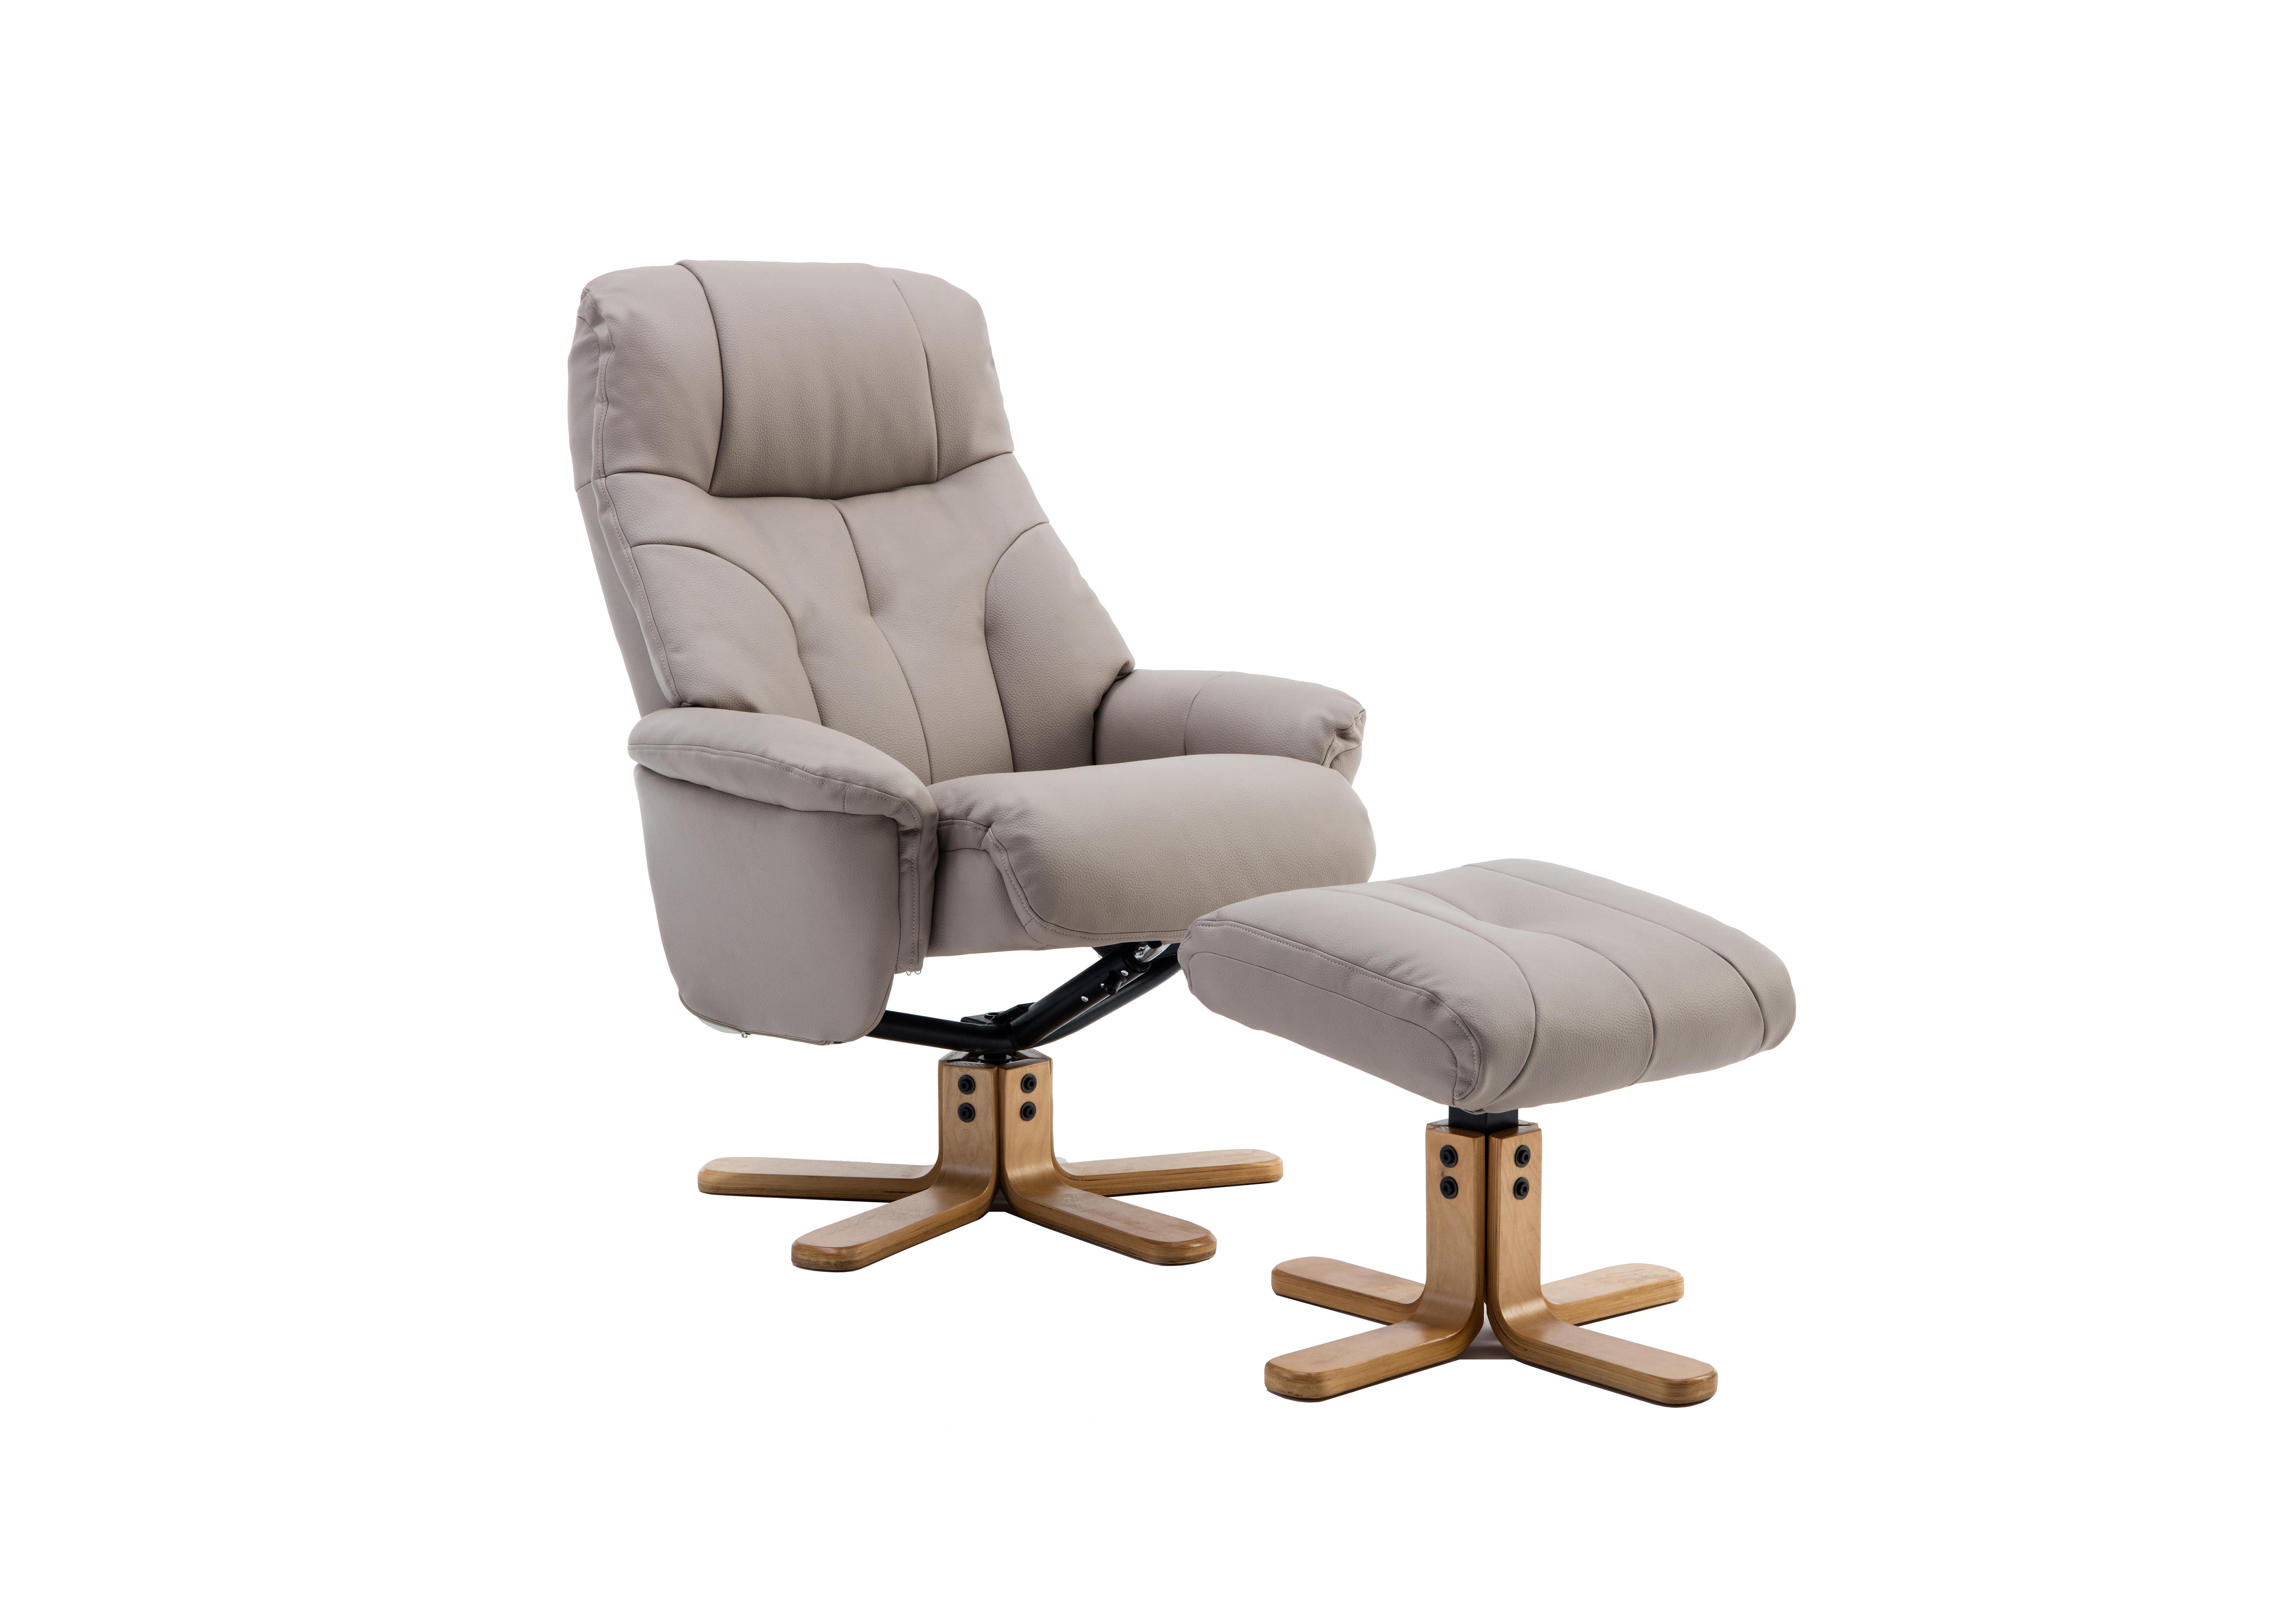 Muscat Faux Leather Swivel Recliner Chair and Footstool in Plush Pebble on Furniture Village